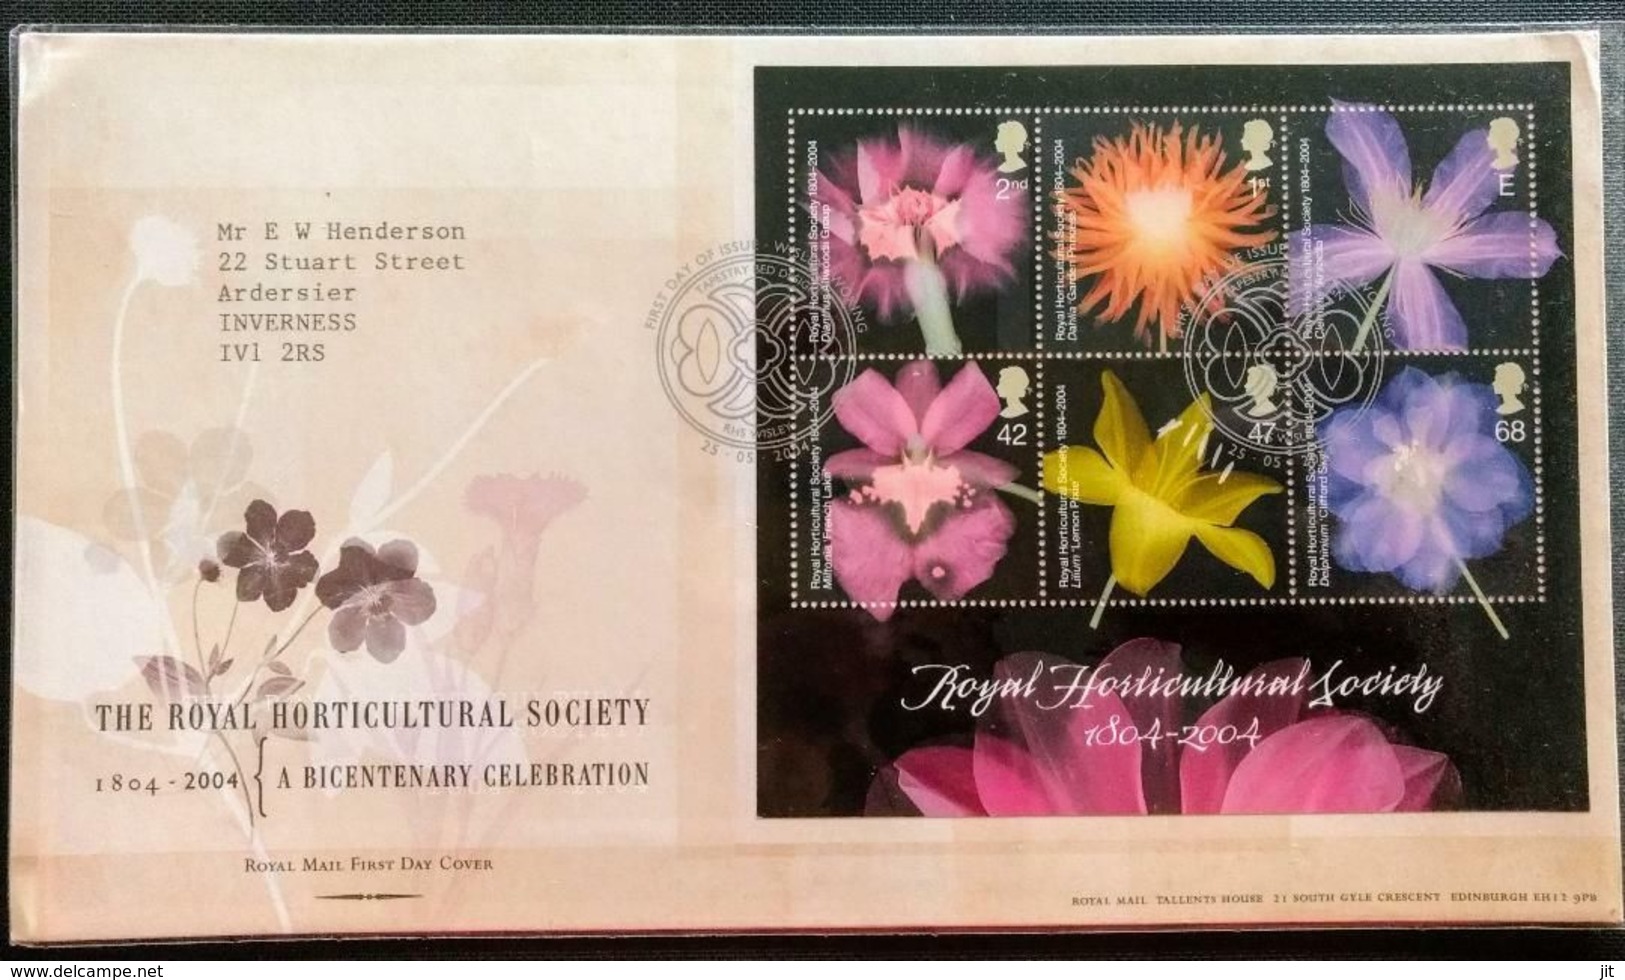 139.GREAT BRITAIN 2004 STAMP M/S THE ROYAL HORTICULTURAL SOCIETY FDC - 2011-2020 Ediciones Decimales